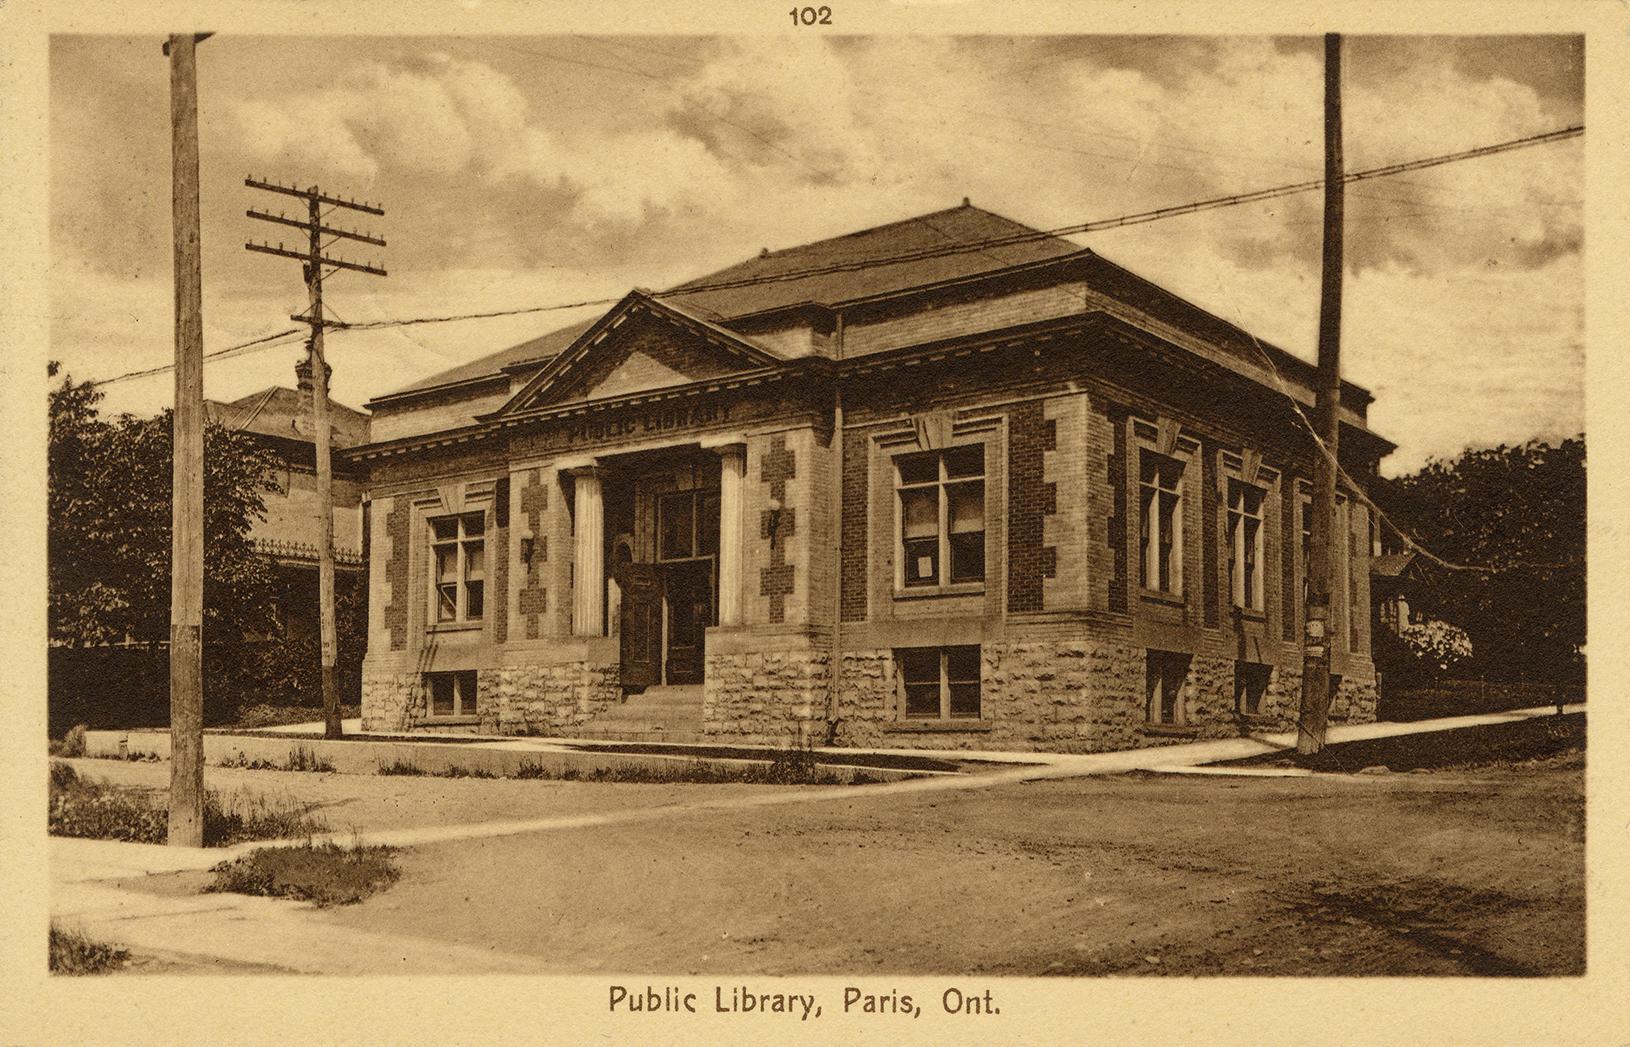 Picture of one storey library building with two front pillars. 